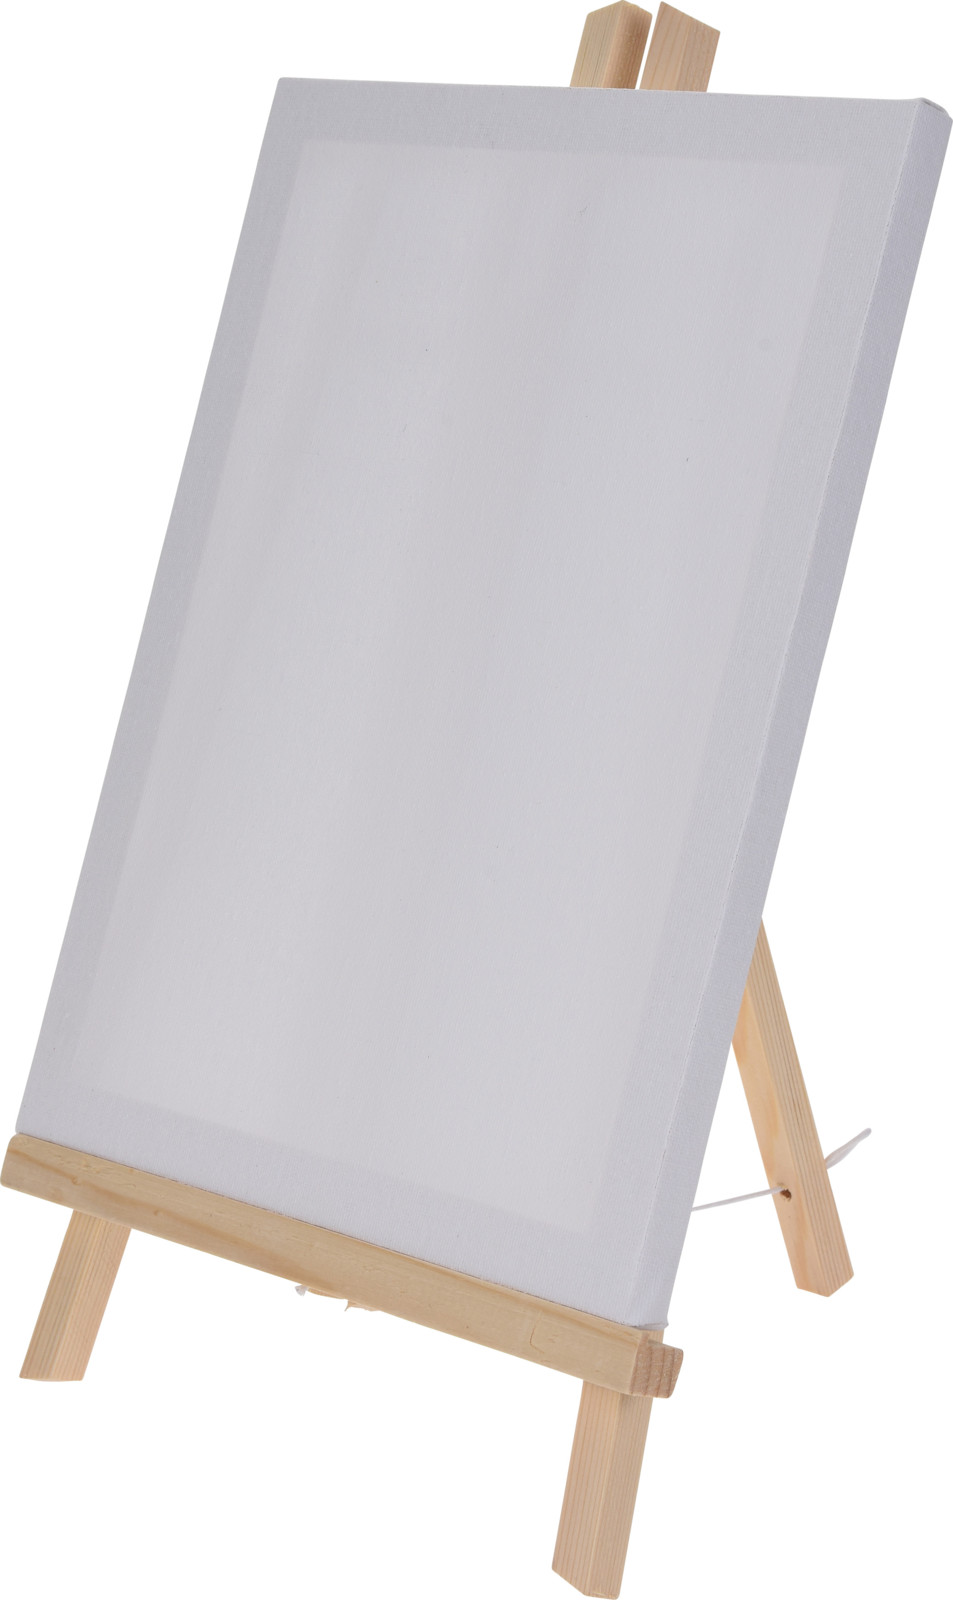 CANVAS WITH EASEL